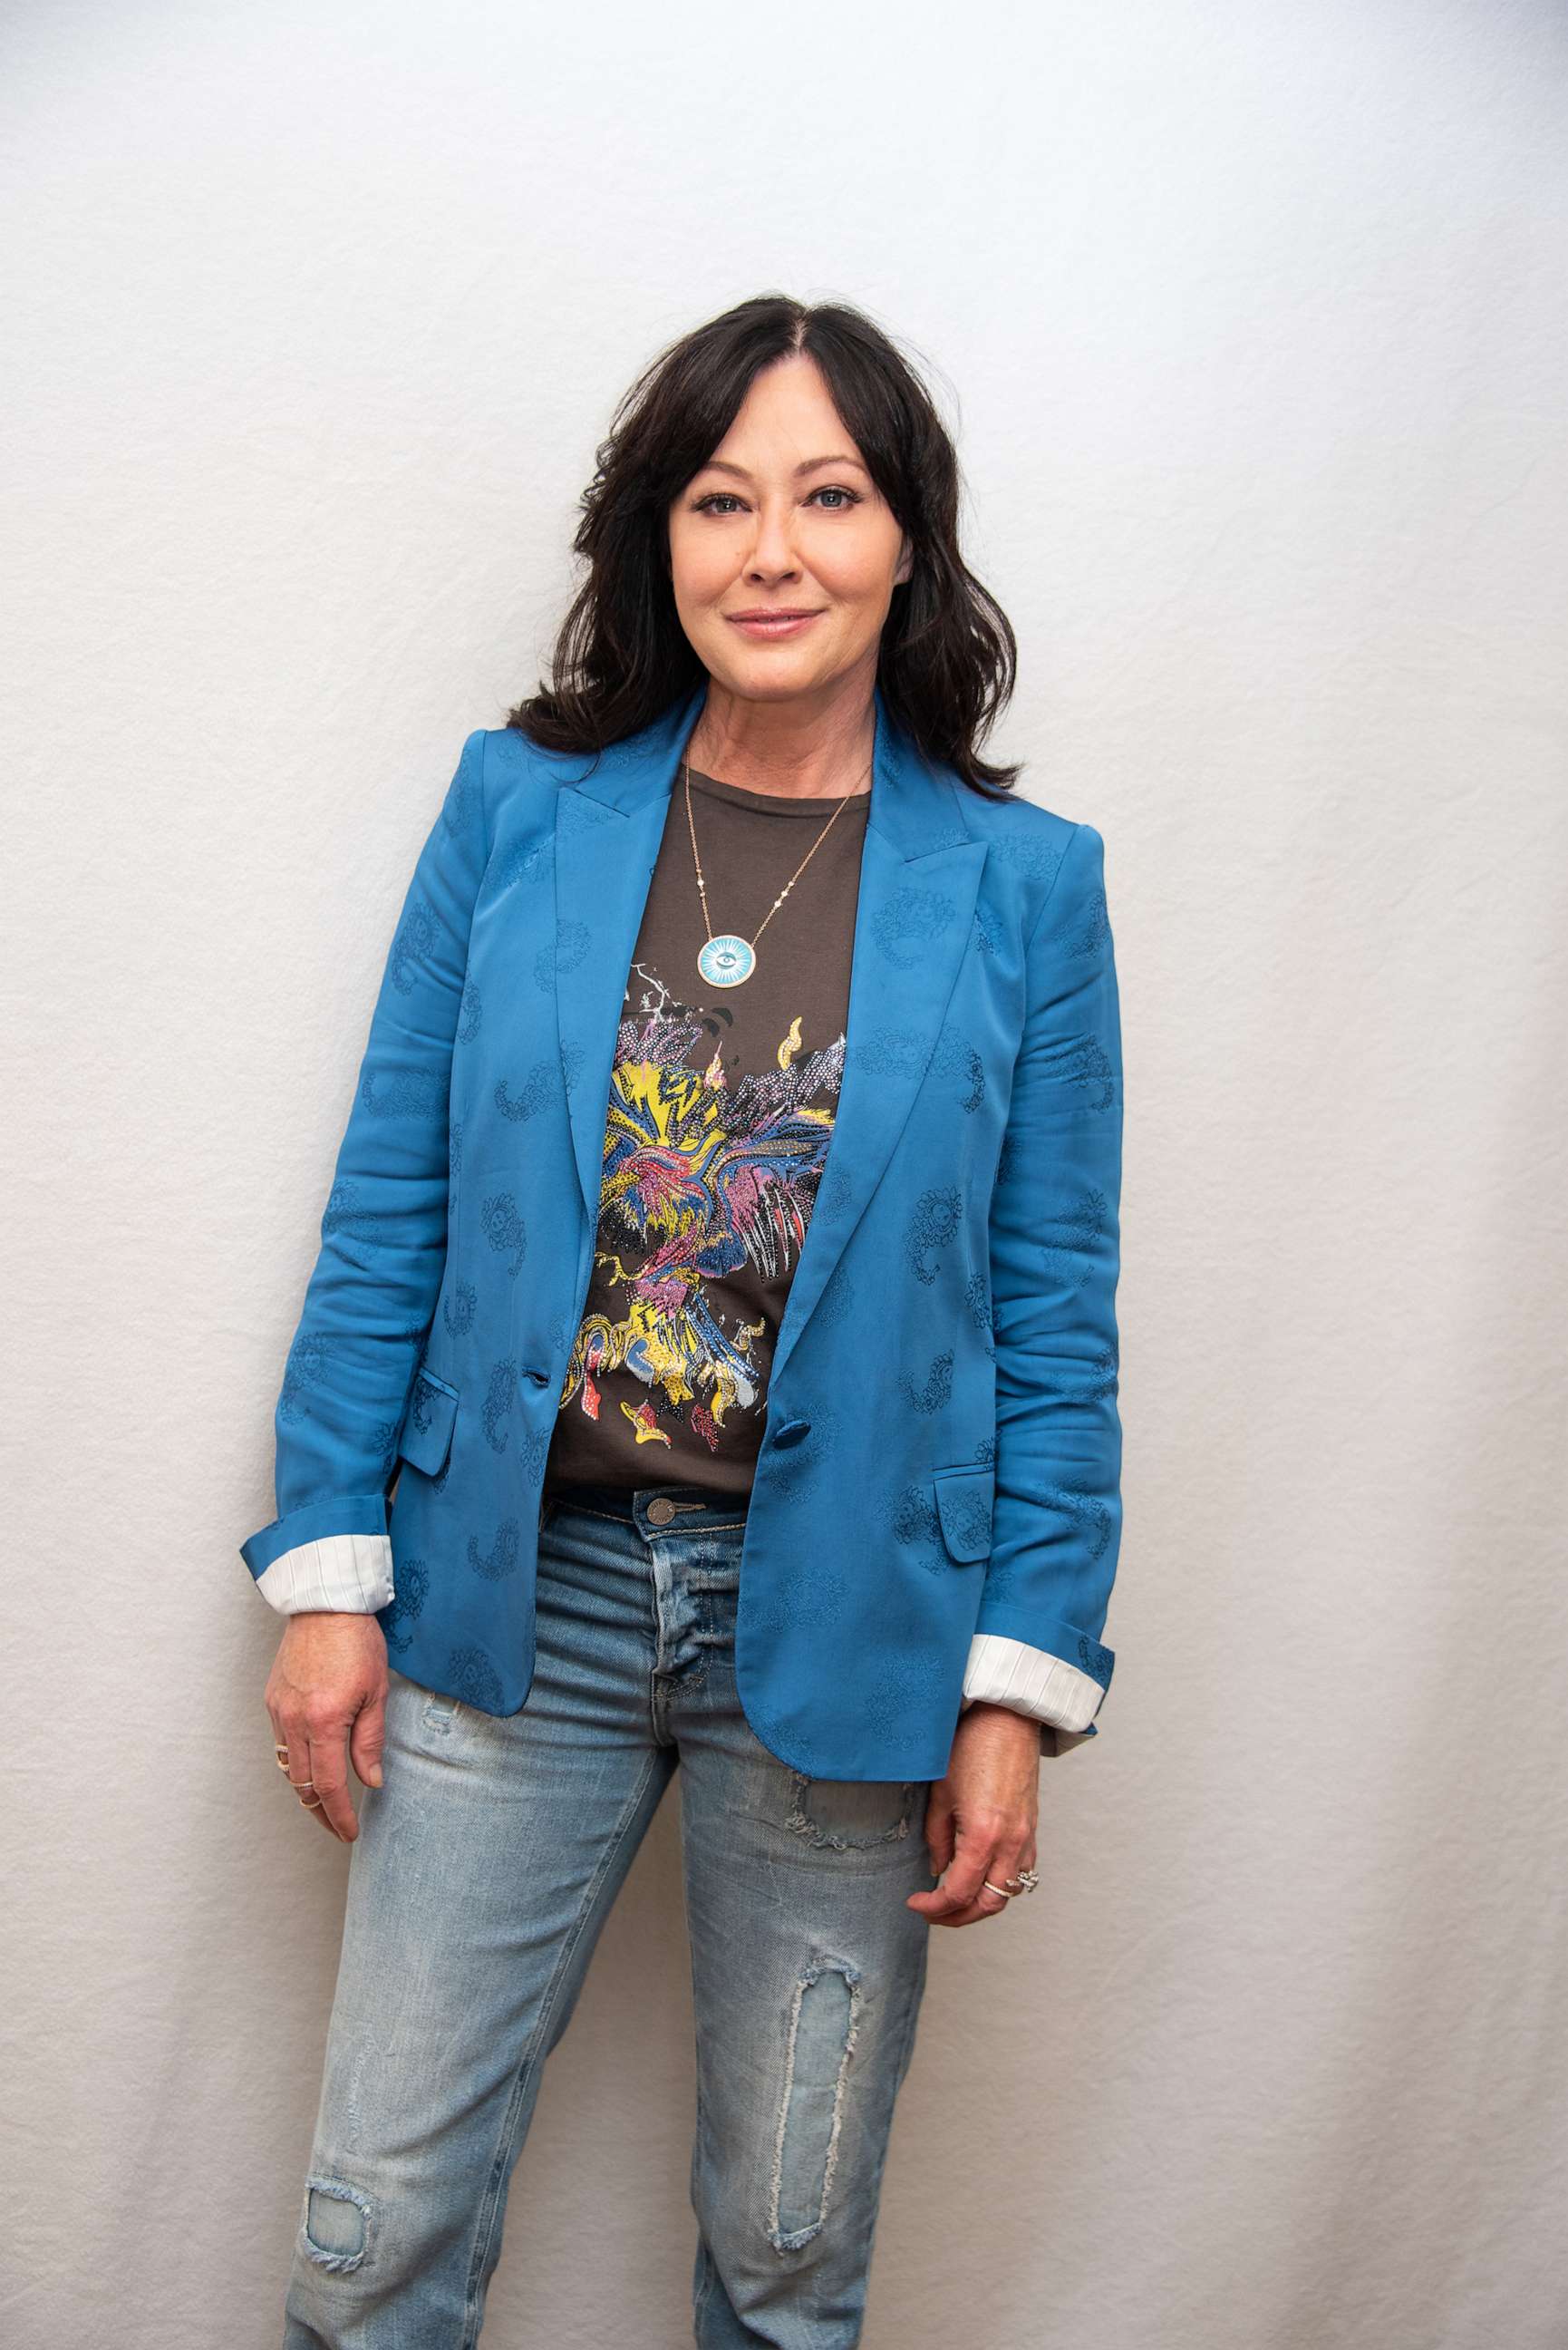 PHOTO: Shannen Doherty at the "BH90210" Press Conference at the Four Seasons Hotel, Aug. 8, 2019, in Beverly Hills, Calif.